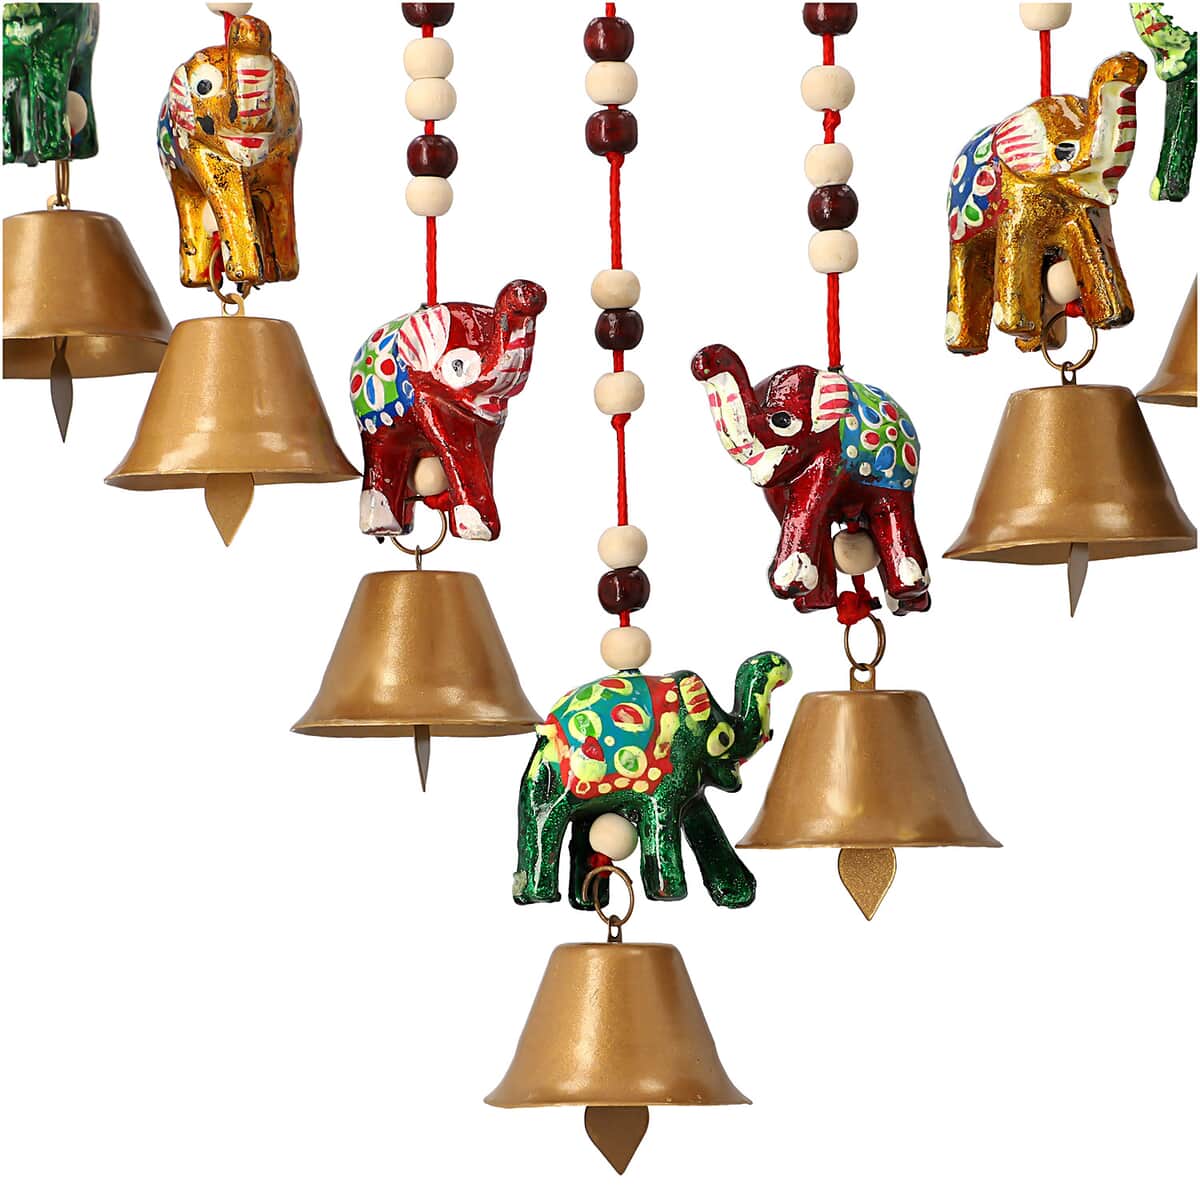 Set of 2 Home Room Decor Handcrafted Wooden Elephant Outdoor Wind Chime Big Iron Bell Noise Maker Multi Color image number 4